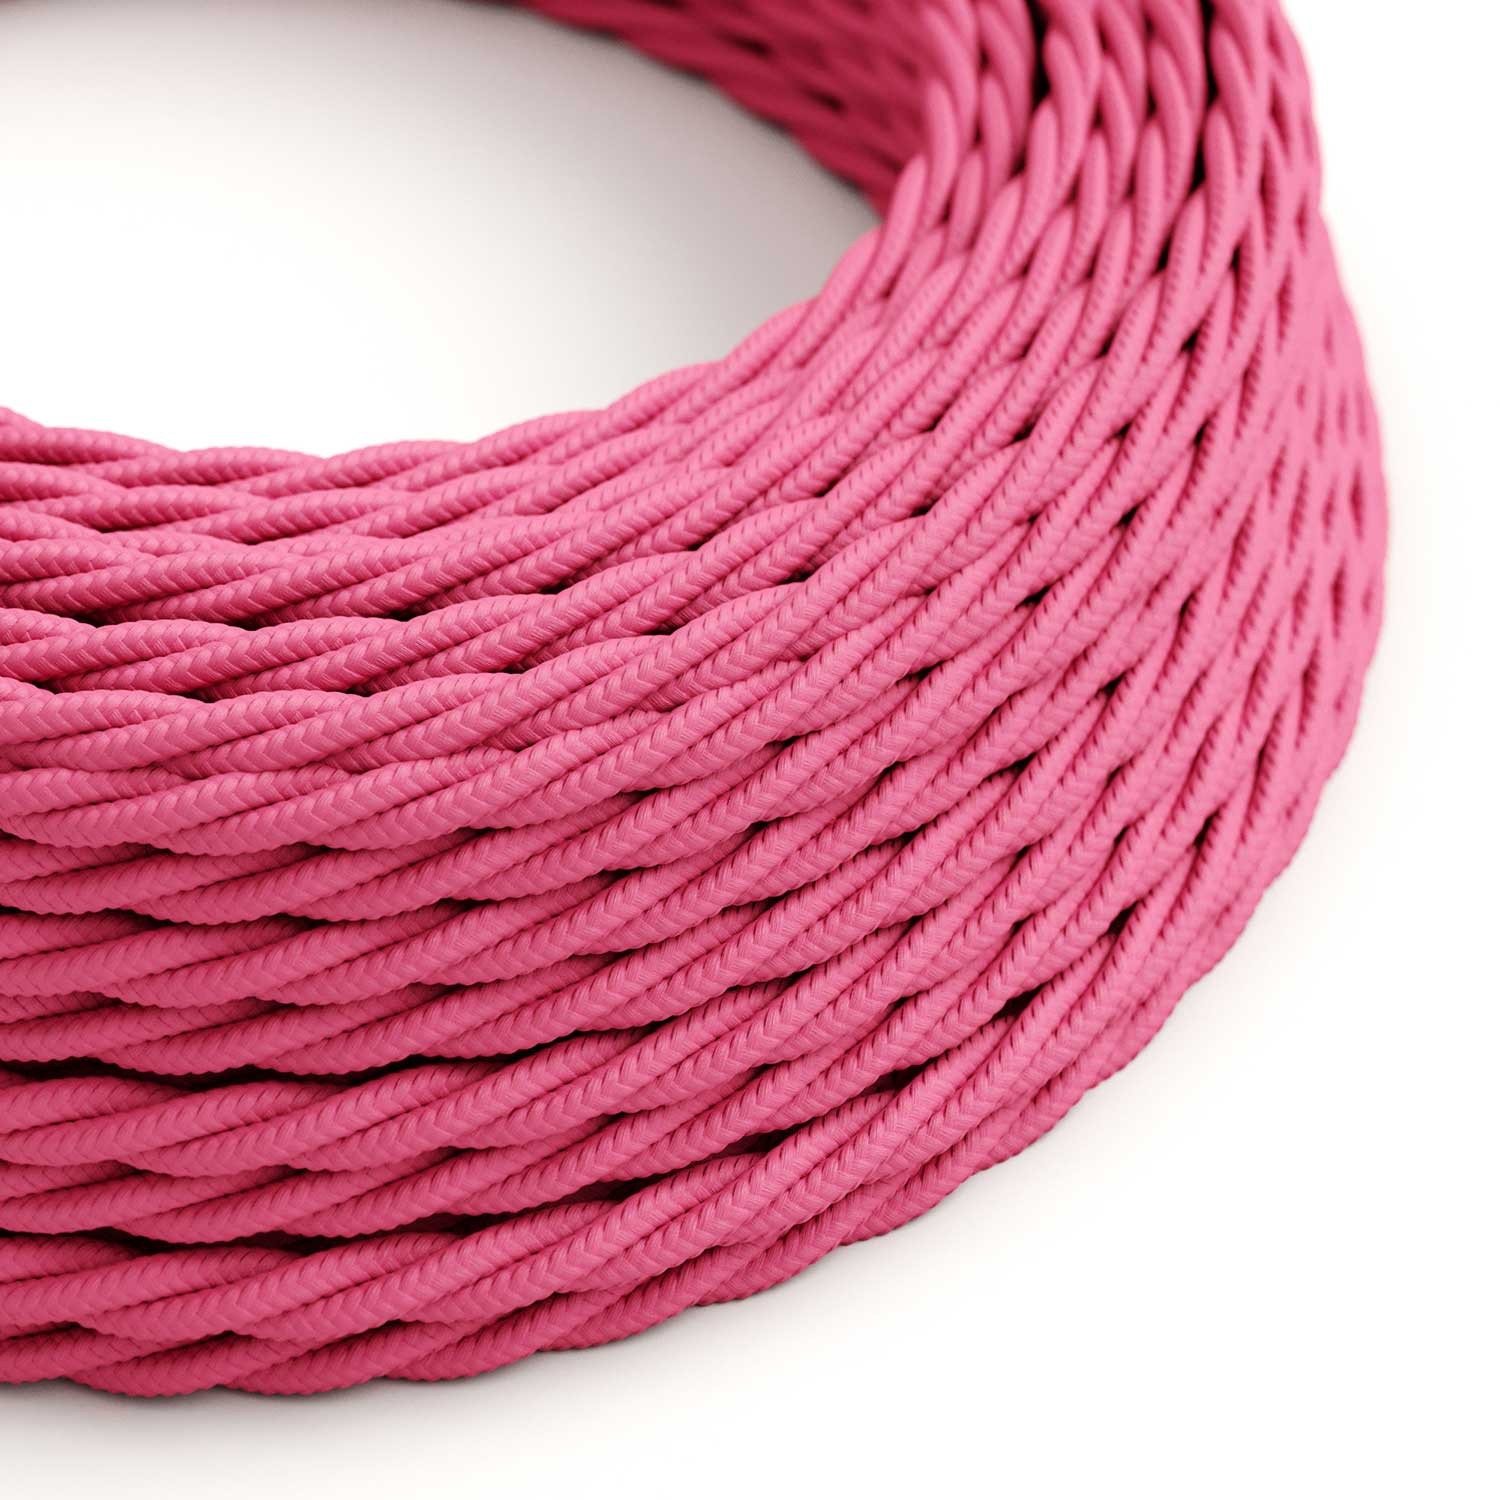 Fuchsia Rayon covered Twisted electric cable 2x18 AWG - TM08